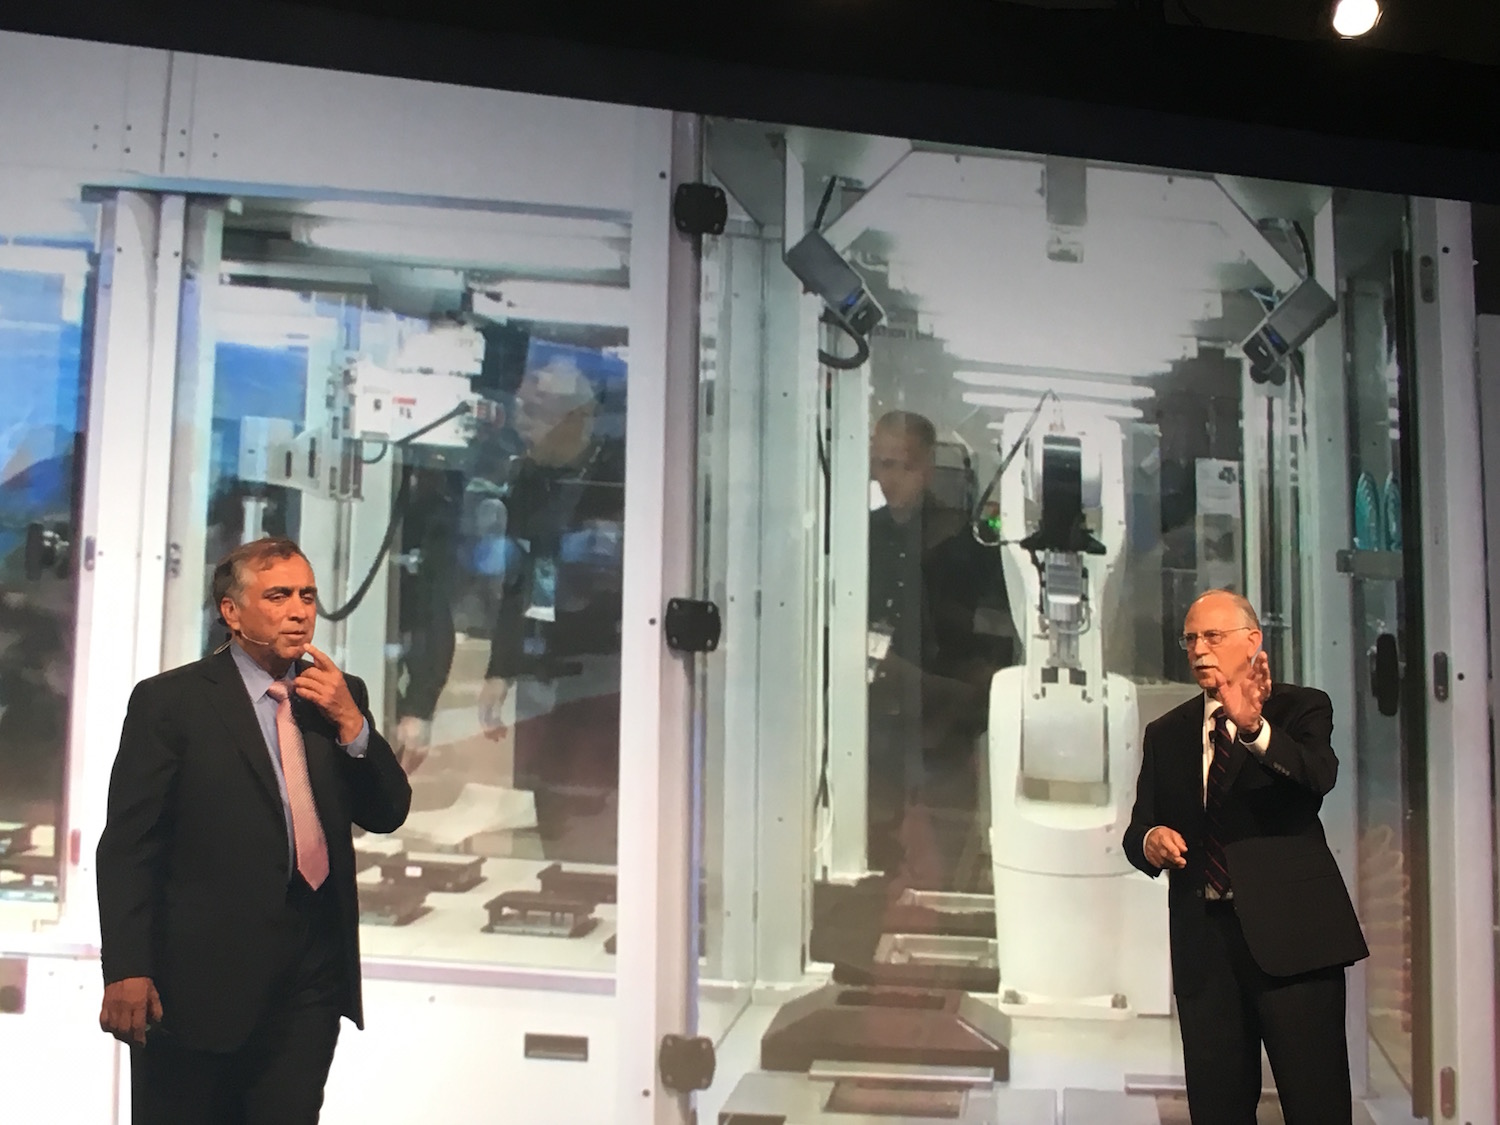  3D Systems CEO Vyomesh Joshi and Founder Chuck Hull introducing the Figure 4 